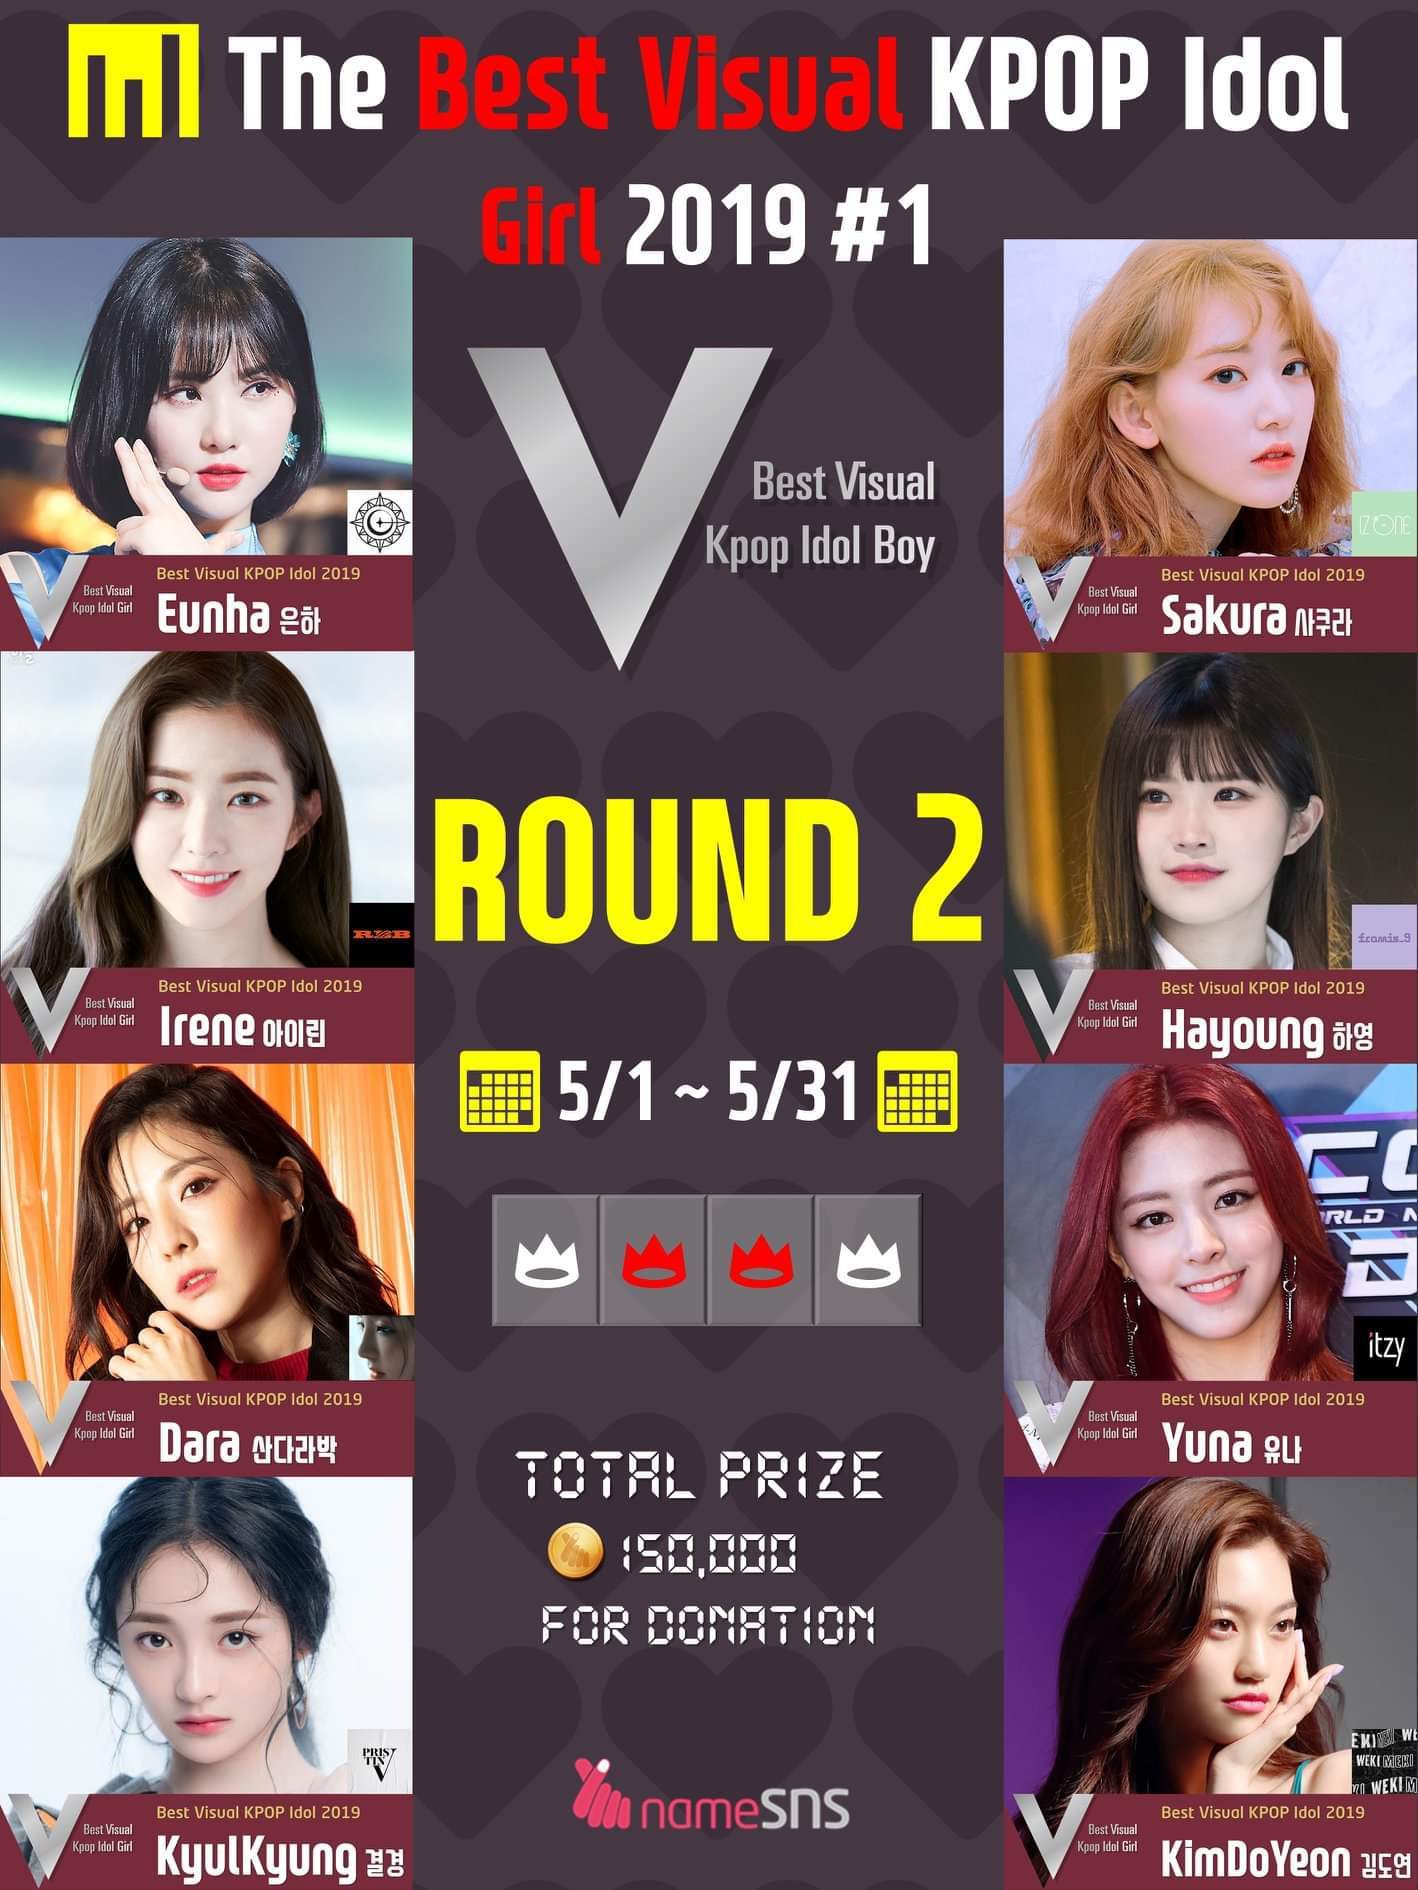 The Best Visual Kpop Idol 2019 1 Girl Round2 May 31 2019 Fromis 9 Amino